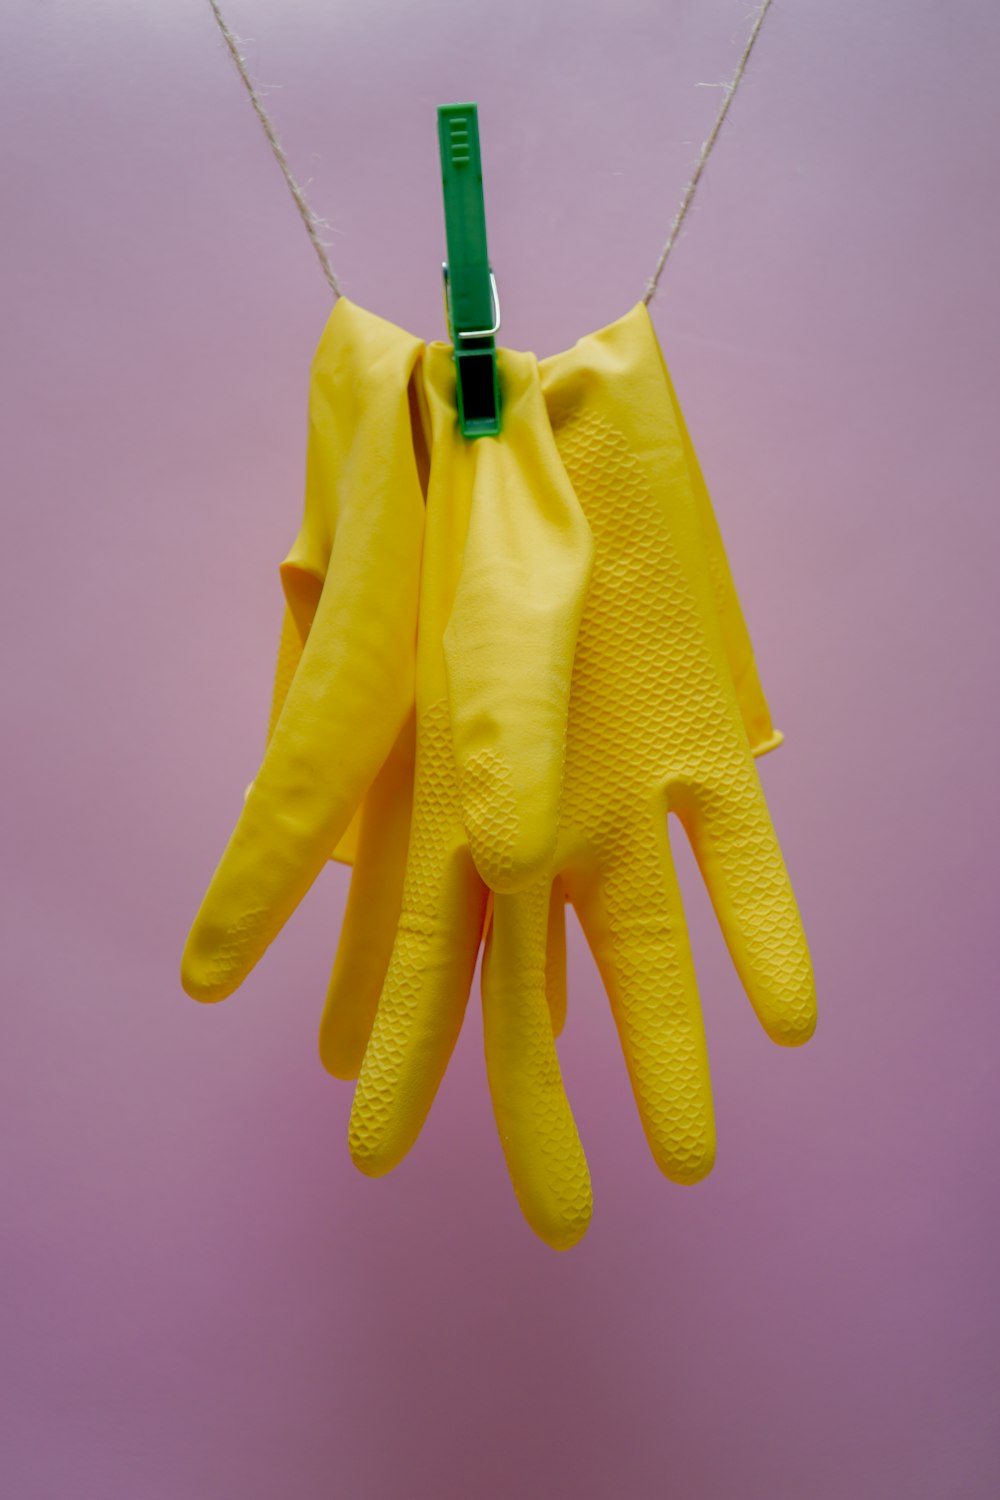 yellow gloves on blue clothes hanger